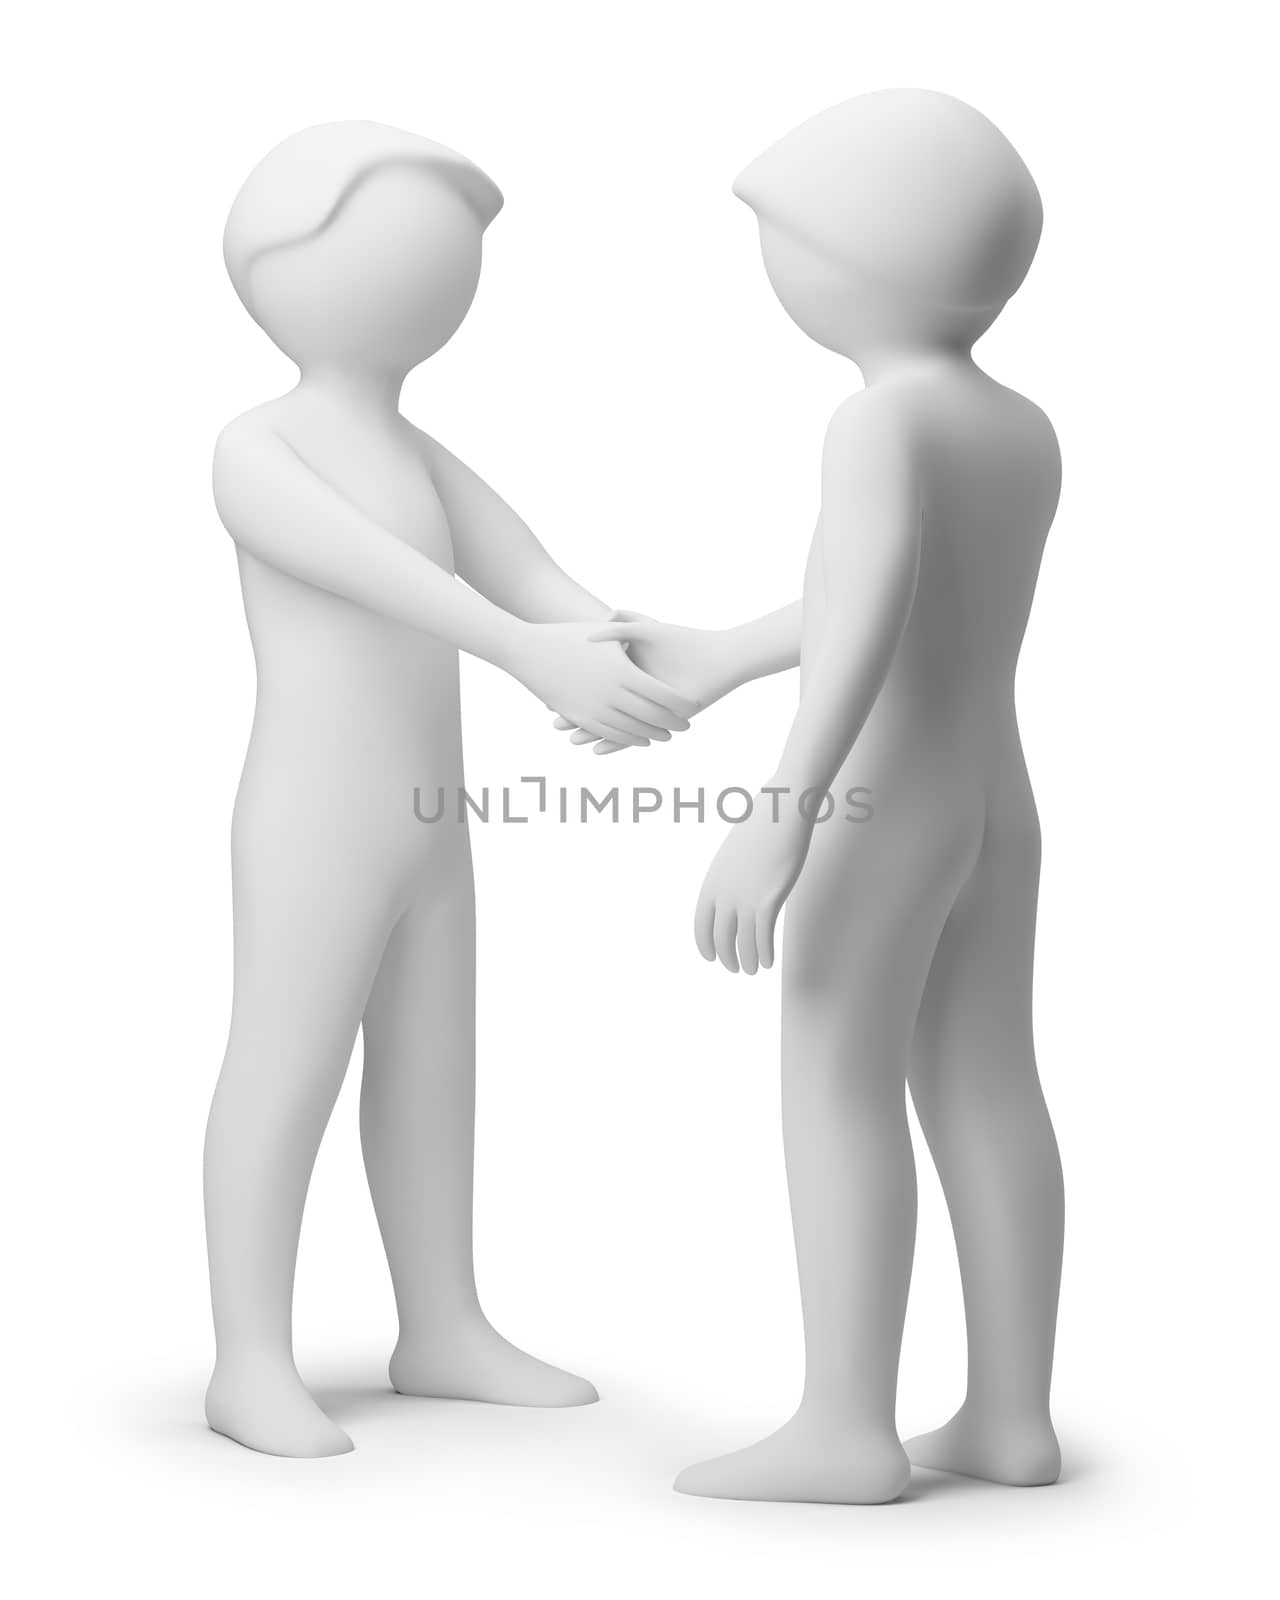 3d people greeting. 3d image. Isolated white background.